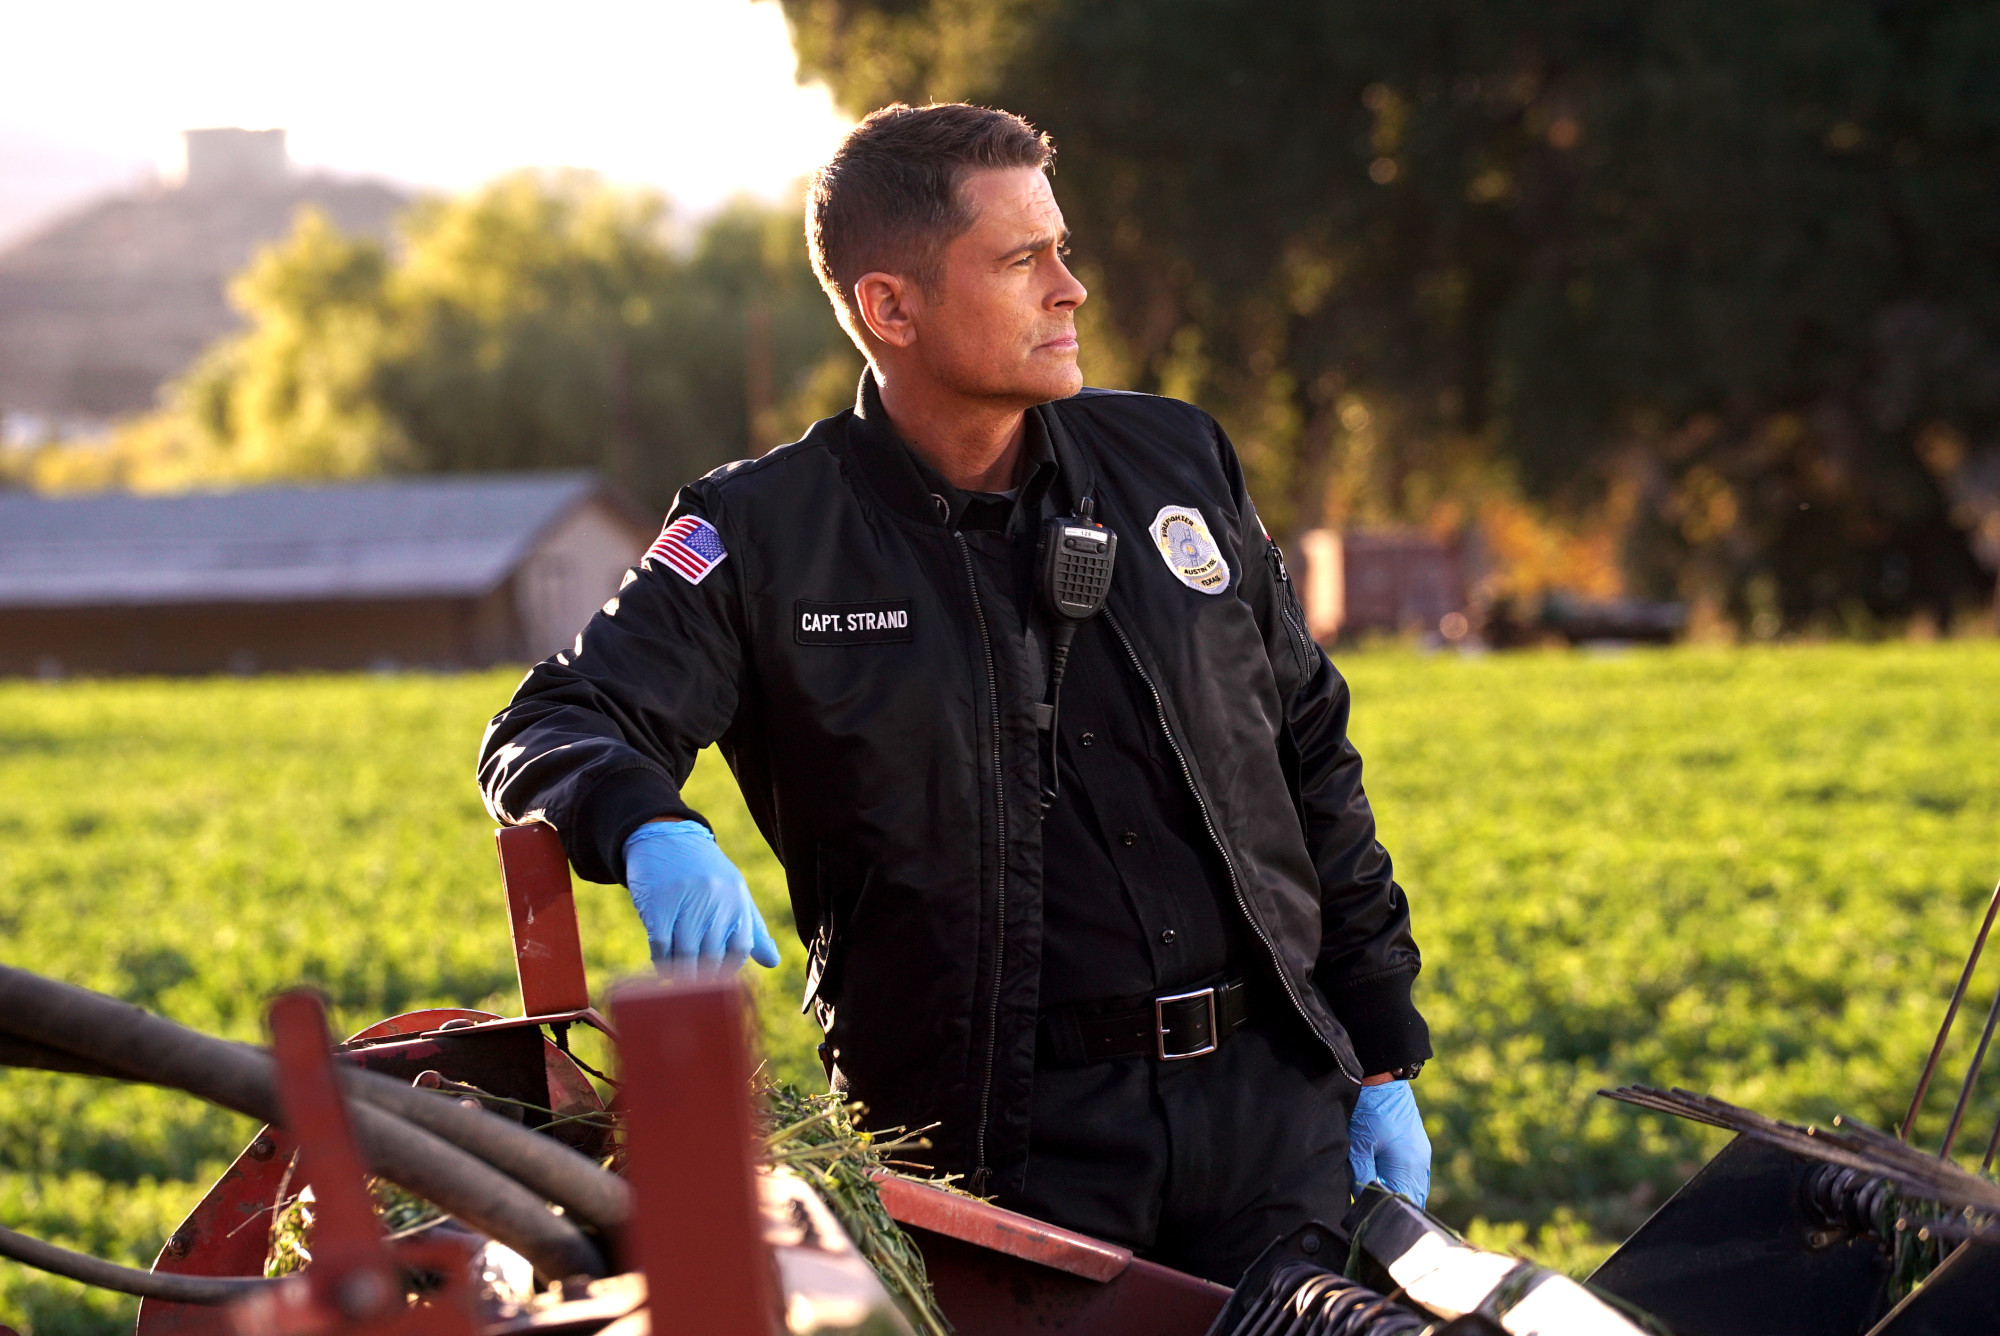 9-1-1: LONE STAR: Rob Lowe in the “Friends Like These” episode of 9-1-1: LONE STAR airing Monday, Feb. 17 (8:00-9:01 PM ET/PT) on FOX. ©2020 Fox Media LLC. CR: Kevin Estrada/FOX.